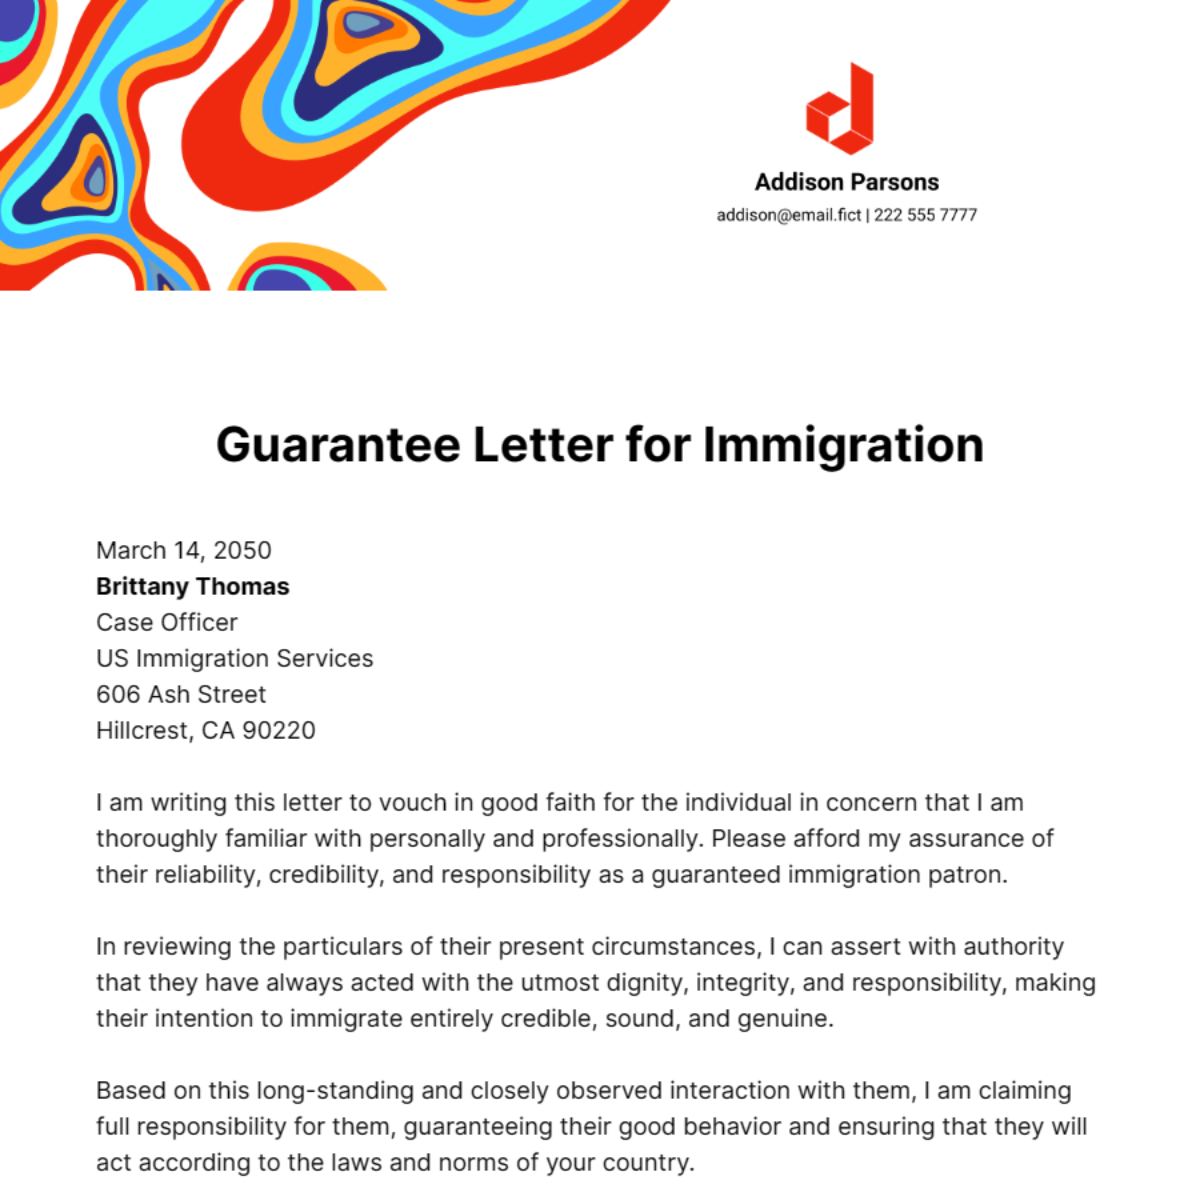 Guarantee Letter for Immigration Template